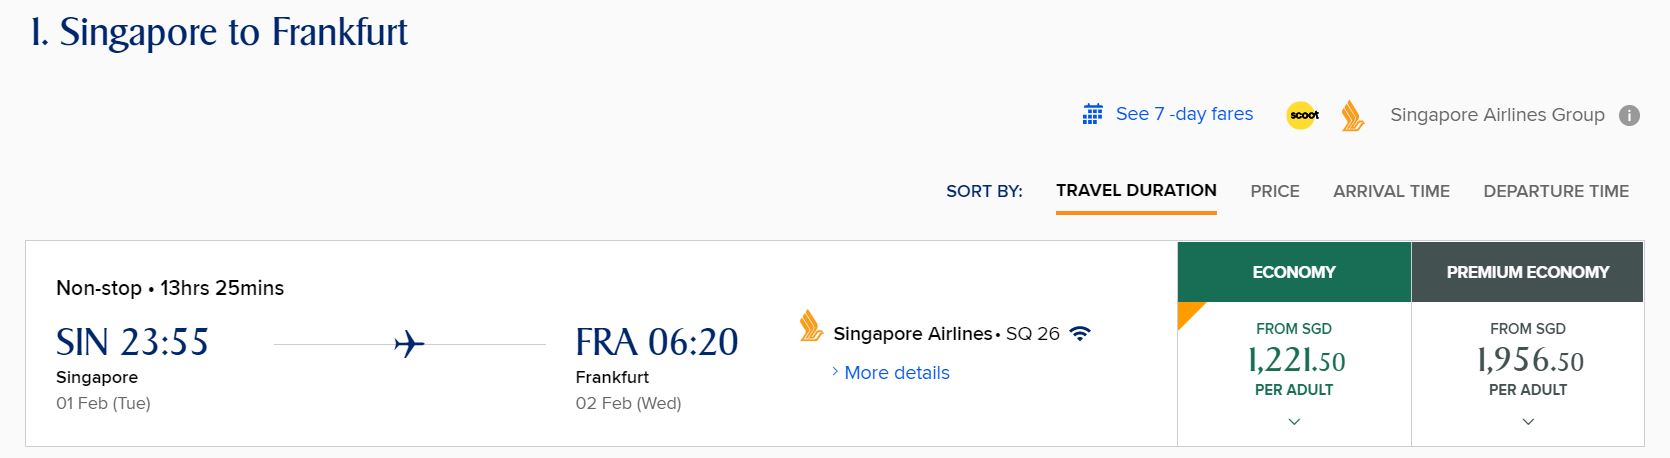 SIA Tickets Singapore to Germany Cost COVID